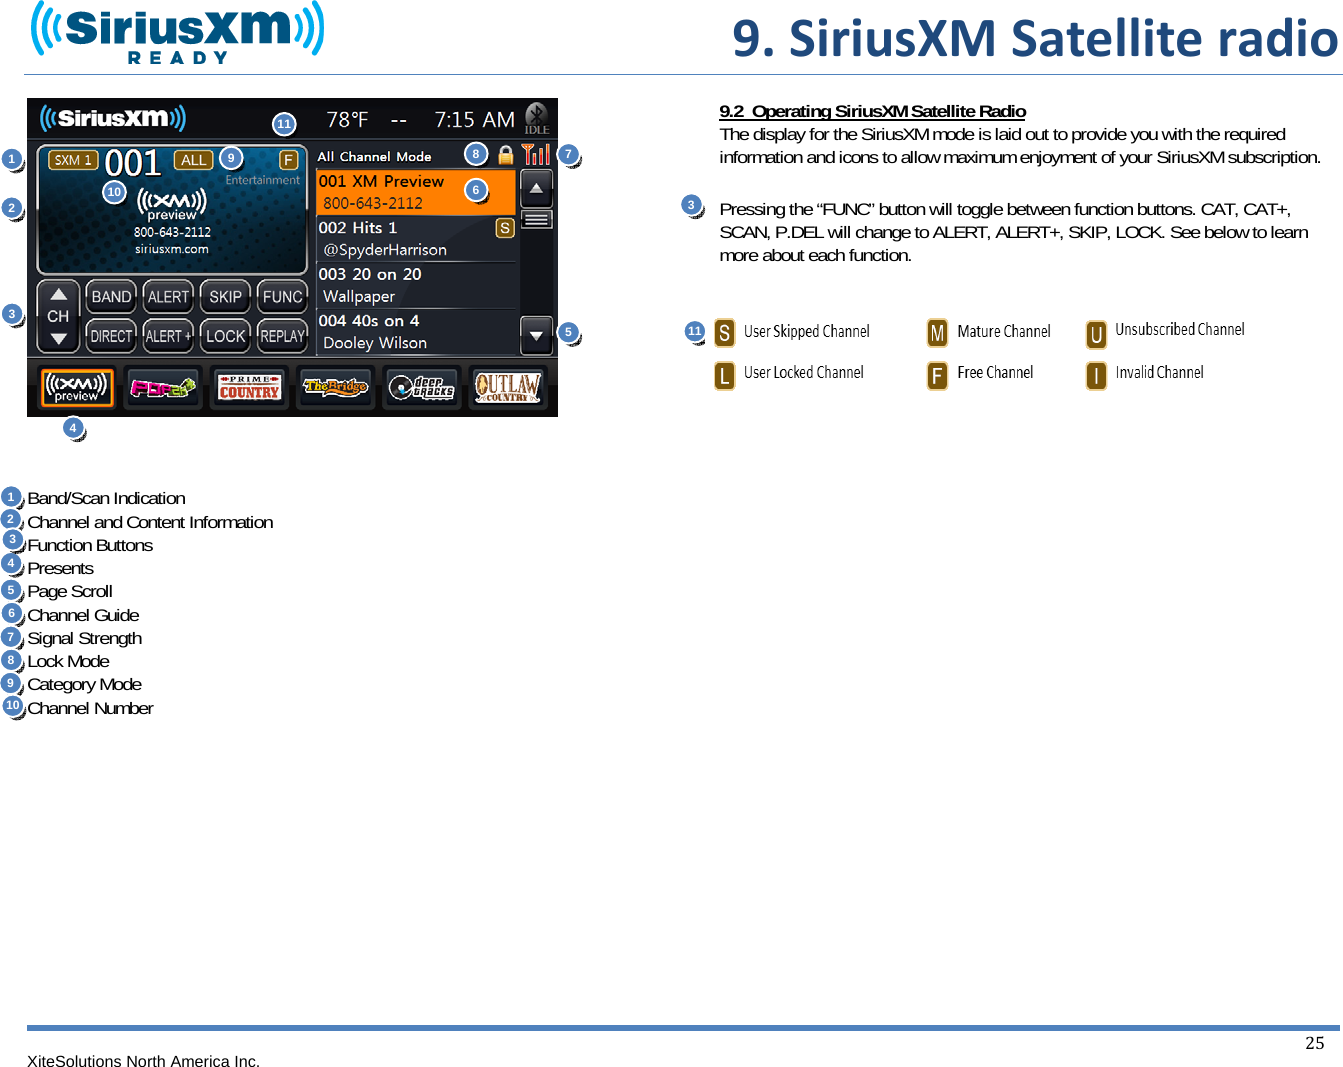  9.SiriusXMSatelliteradioXiteSolutions North America Inc.  25     Band/Scan Indication Channel and Content Information Function Buttons Presents Page Scroll Channel Guide Signal Strength Lock Mode Category Mode Channel Number              9.2  Operating SiriusXM Satellite Radio The display for the SiriusXM mode is laid out to provide you with the required information and icons to allow maximum enjoyment of your SiriusXM subscription.  Pressing the “FUNC” button will toggle between function buttons. CAT, CAT+, SCAN, P.DEL will change to ALERT, ALERT+, SKIP, LOCK. See below to learn more about each function.      1 52 3 4 6789 10111 2 3 45 6 7 8 9 10 11 3